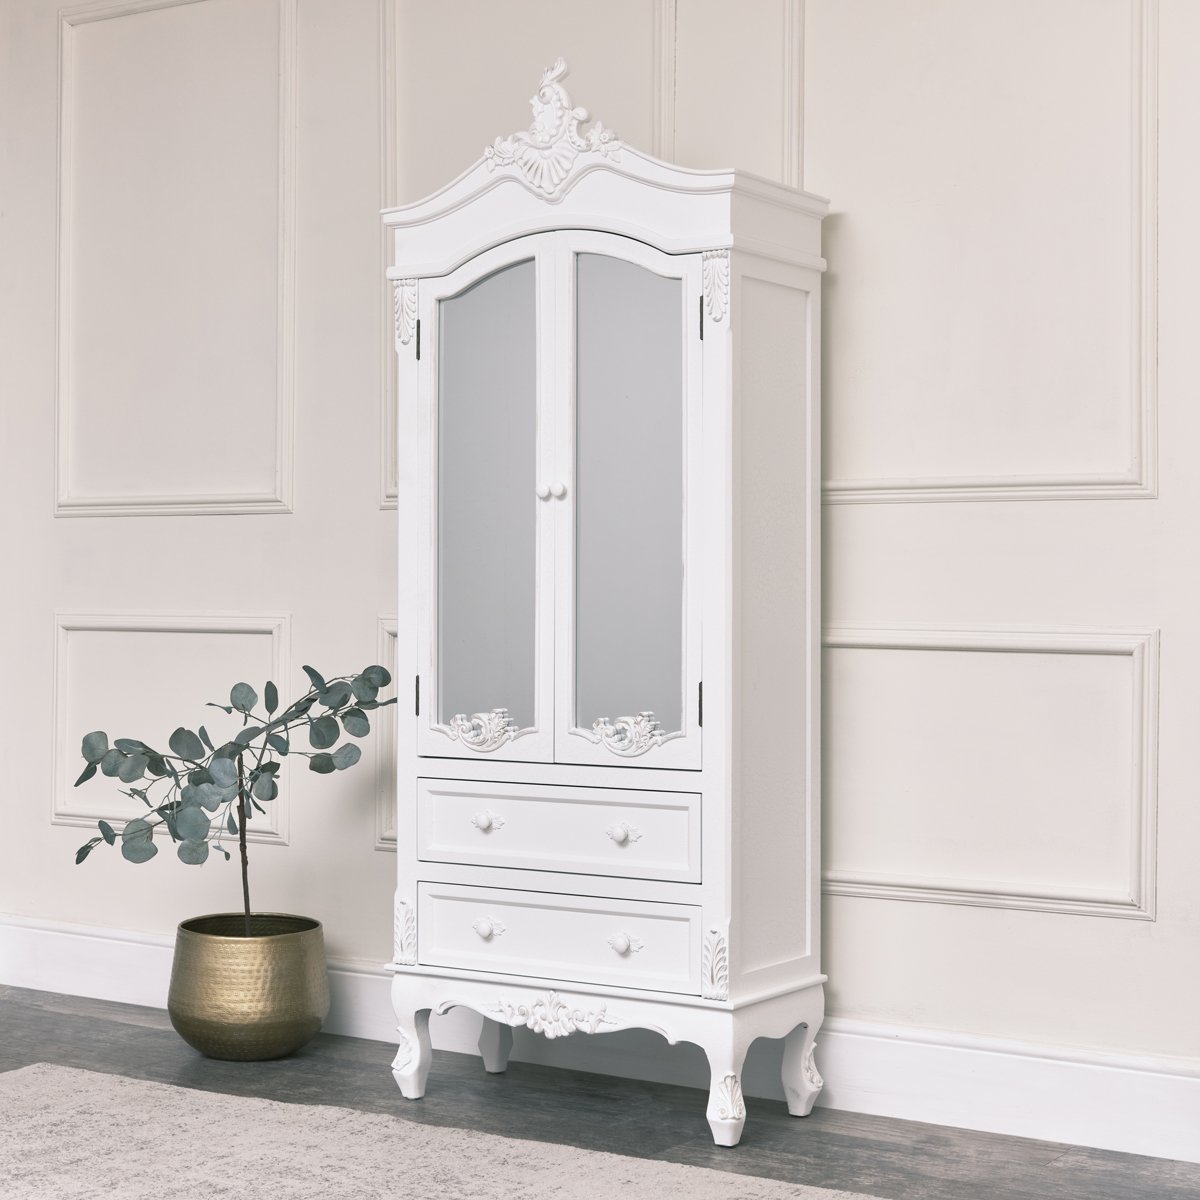 Antique White Closet, Dressing Table Set, Chest of Drawers & Pair of Bedside Tables - Pays Blanc Range